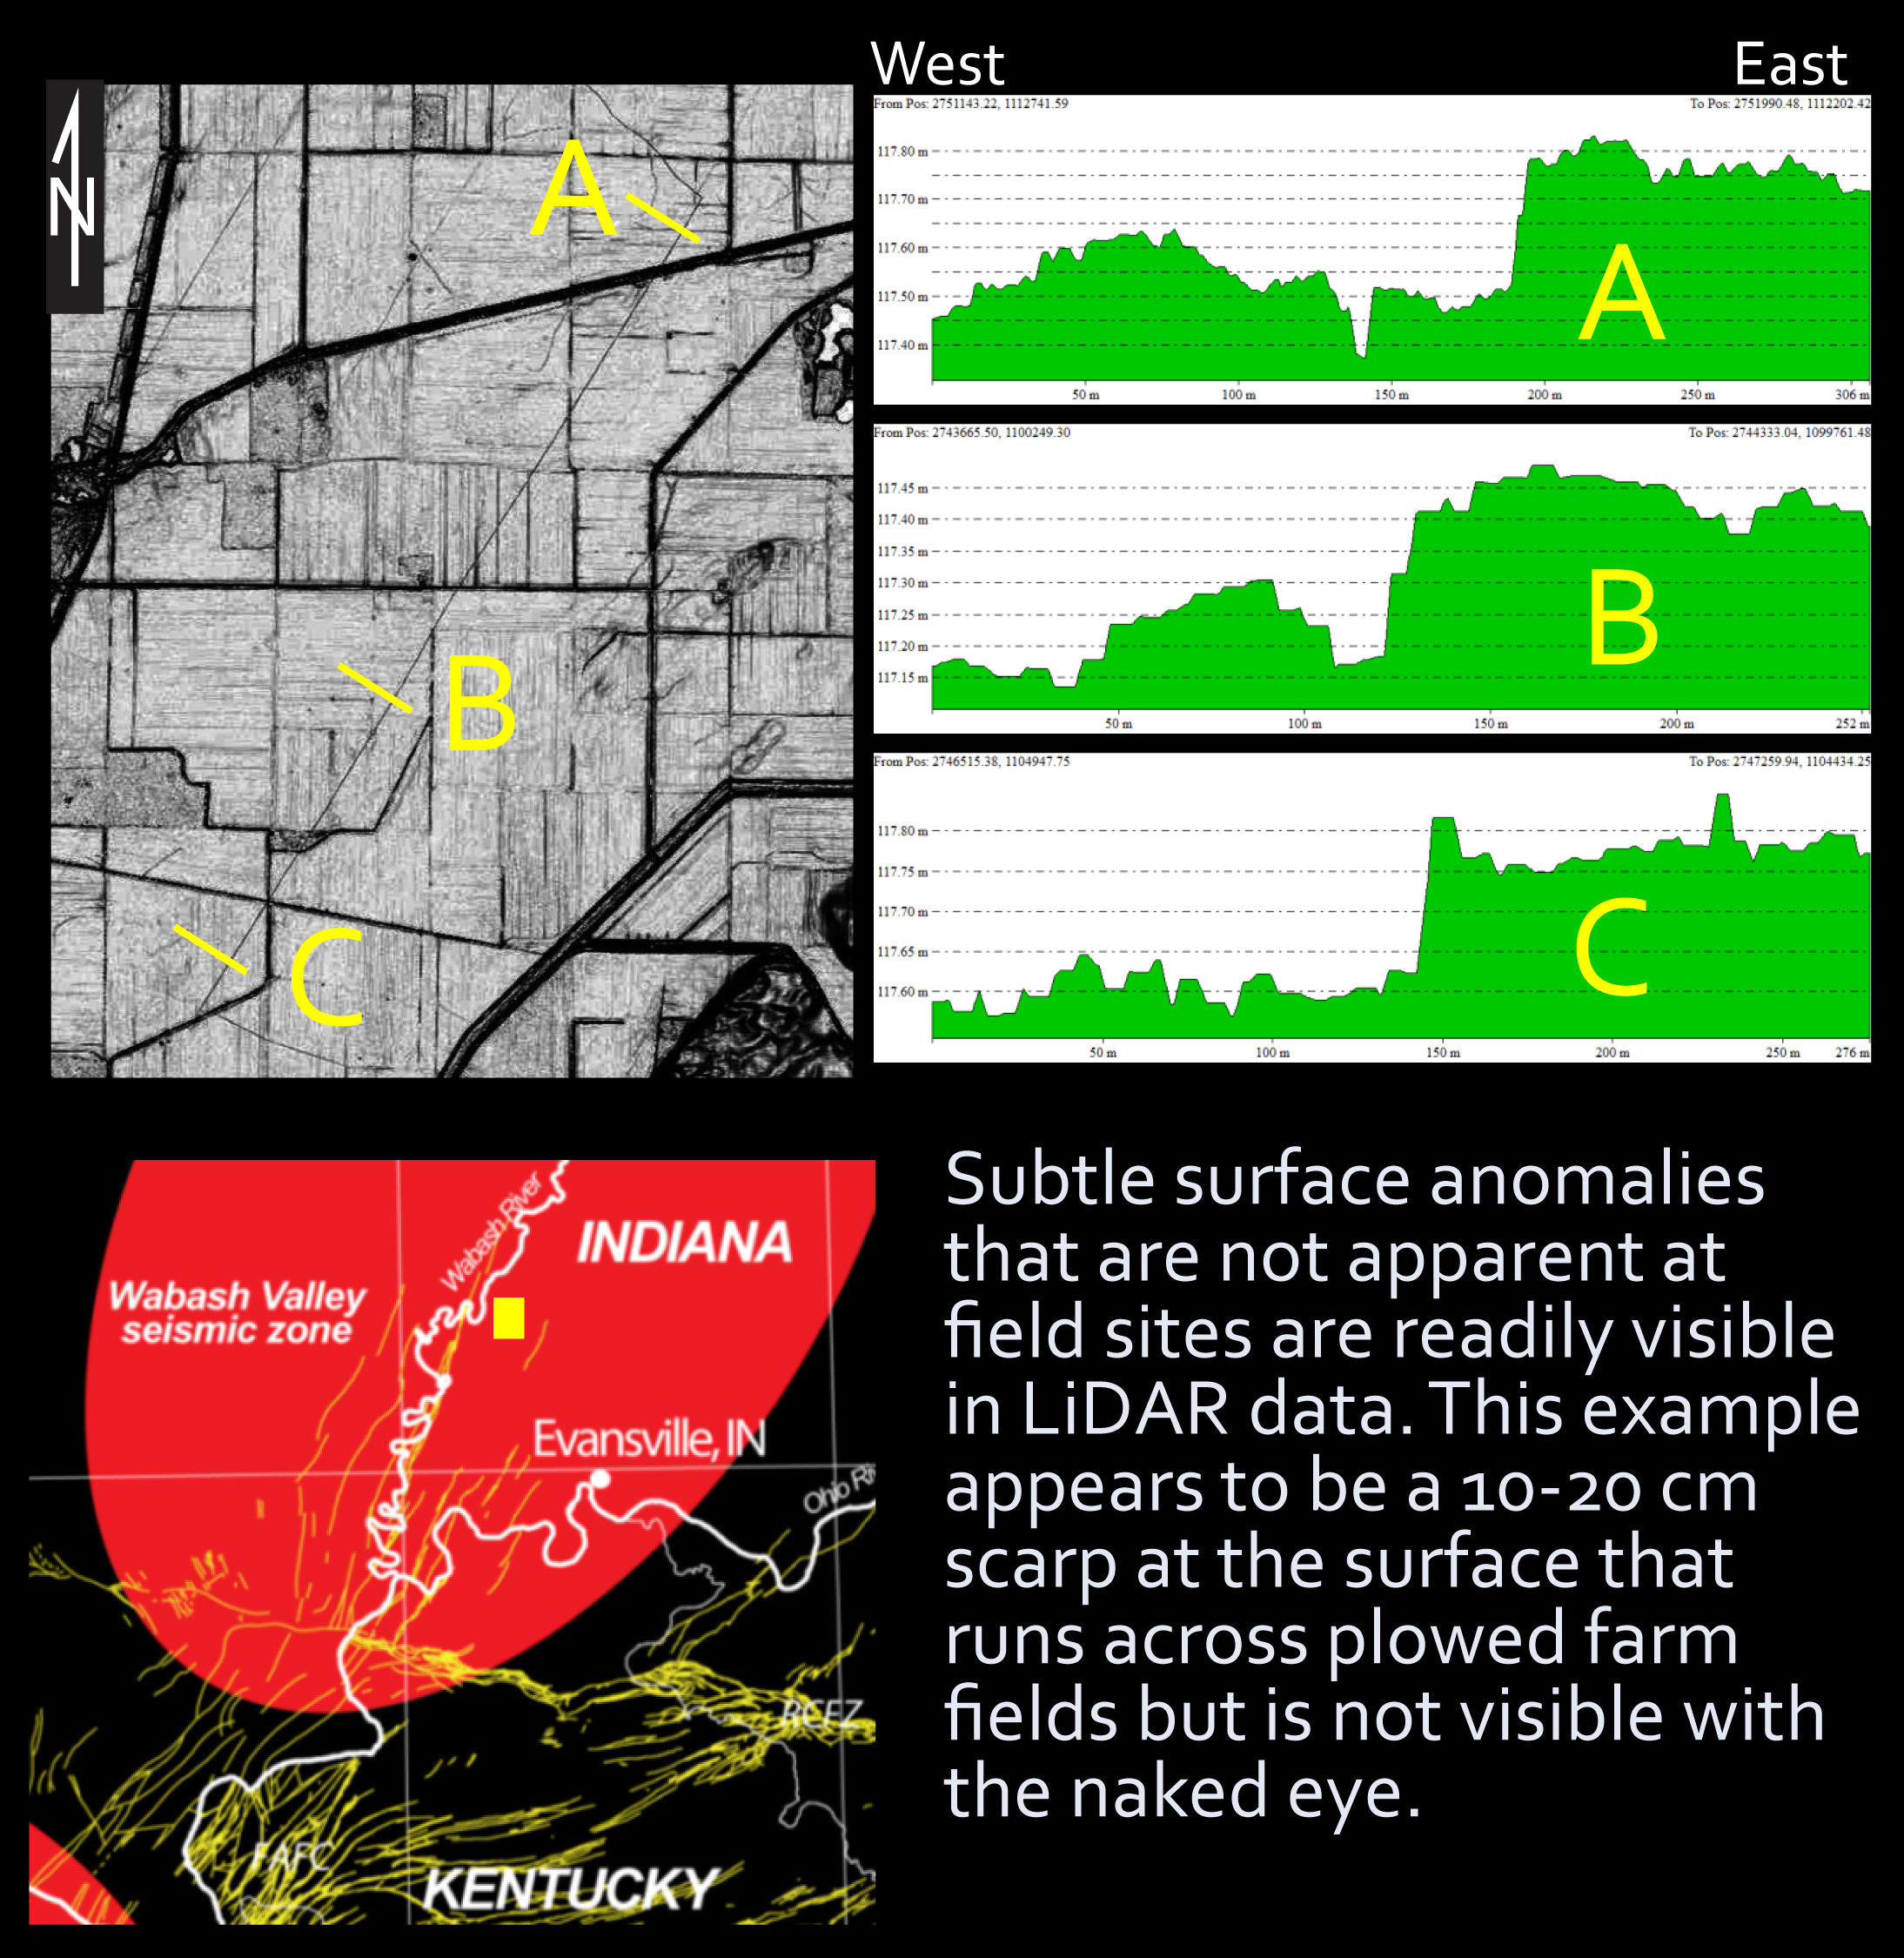 Example of a surface anomaly in the Wabash Valley seismic zone that is visible only by using lidar.